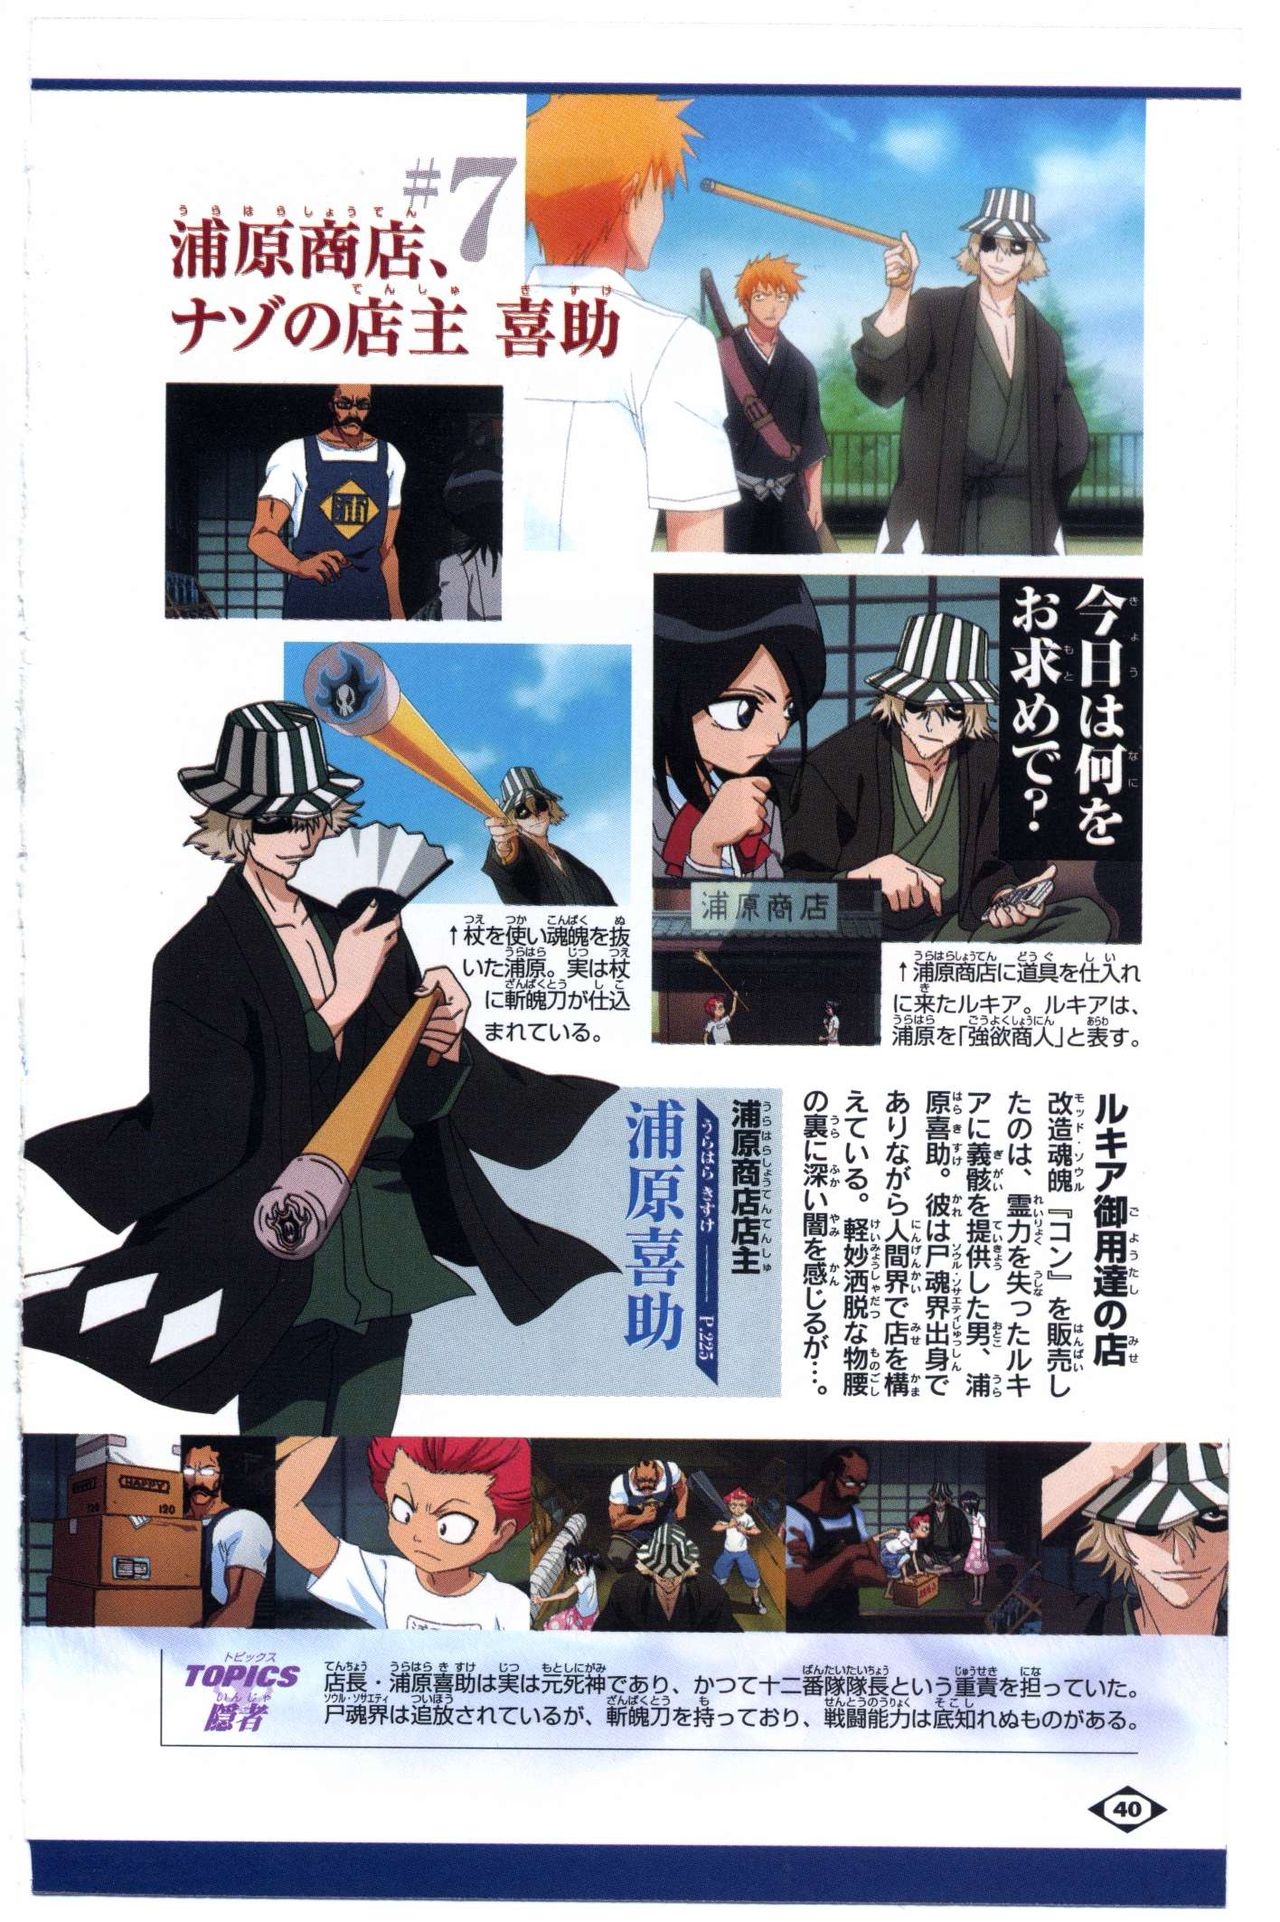 Bleach: Official Animation Book VIBEs 40